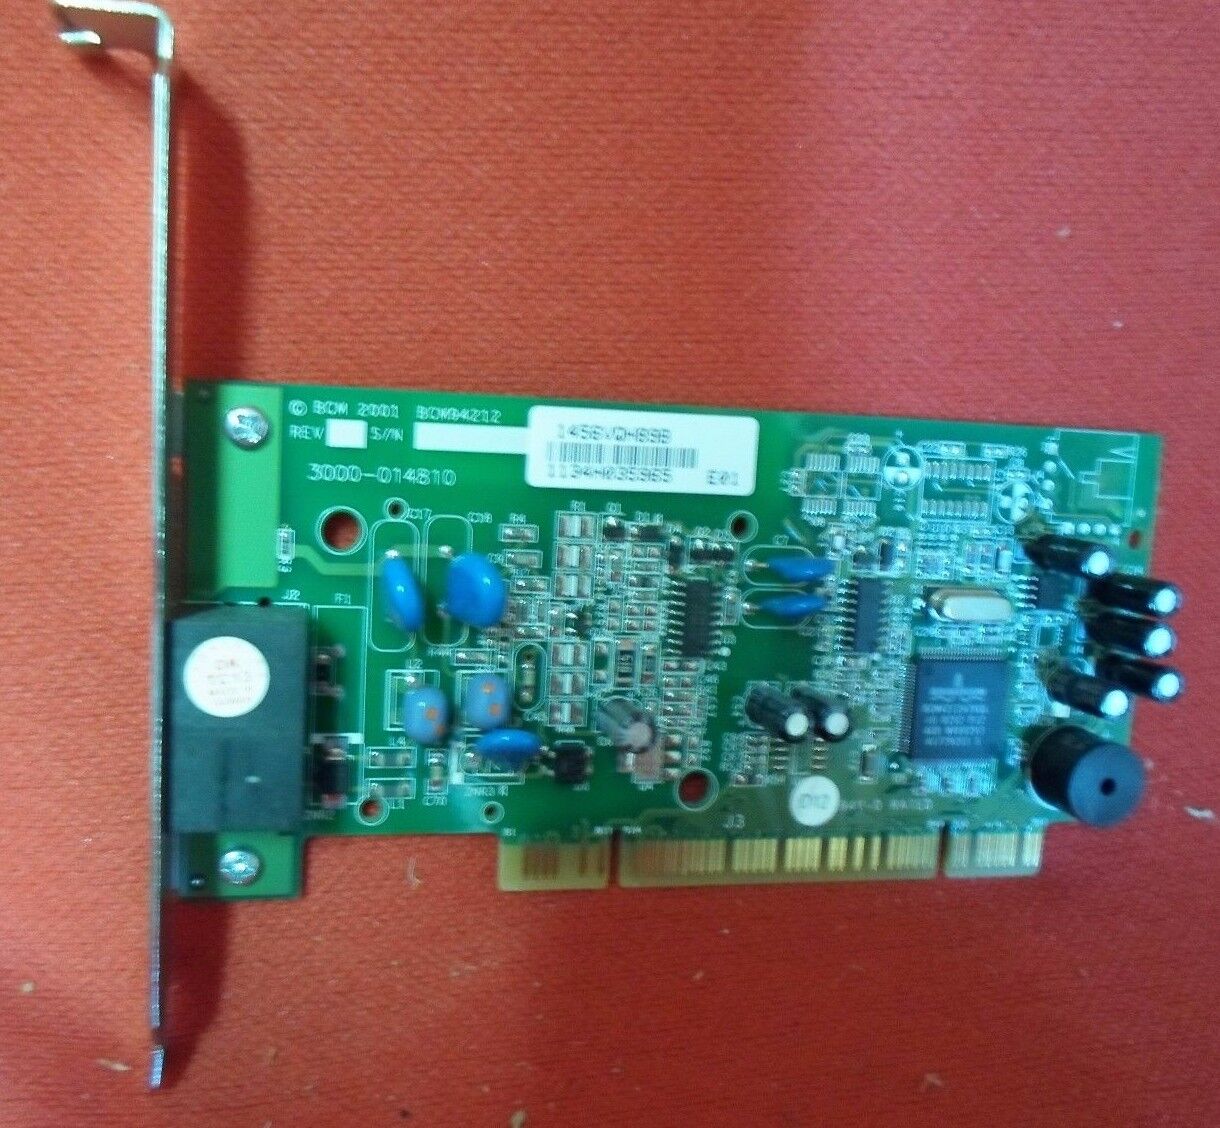 BCM 94212 Broadcom PCI 56K Phone Fax Modem from Dell Tower Computer